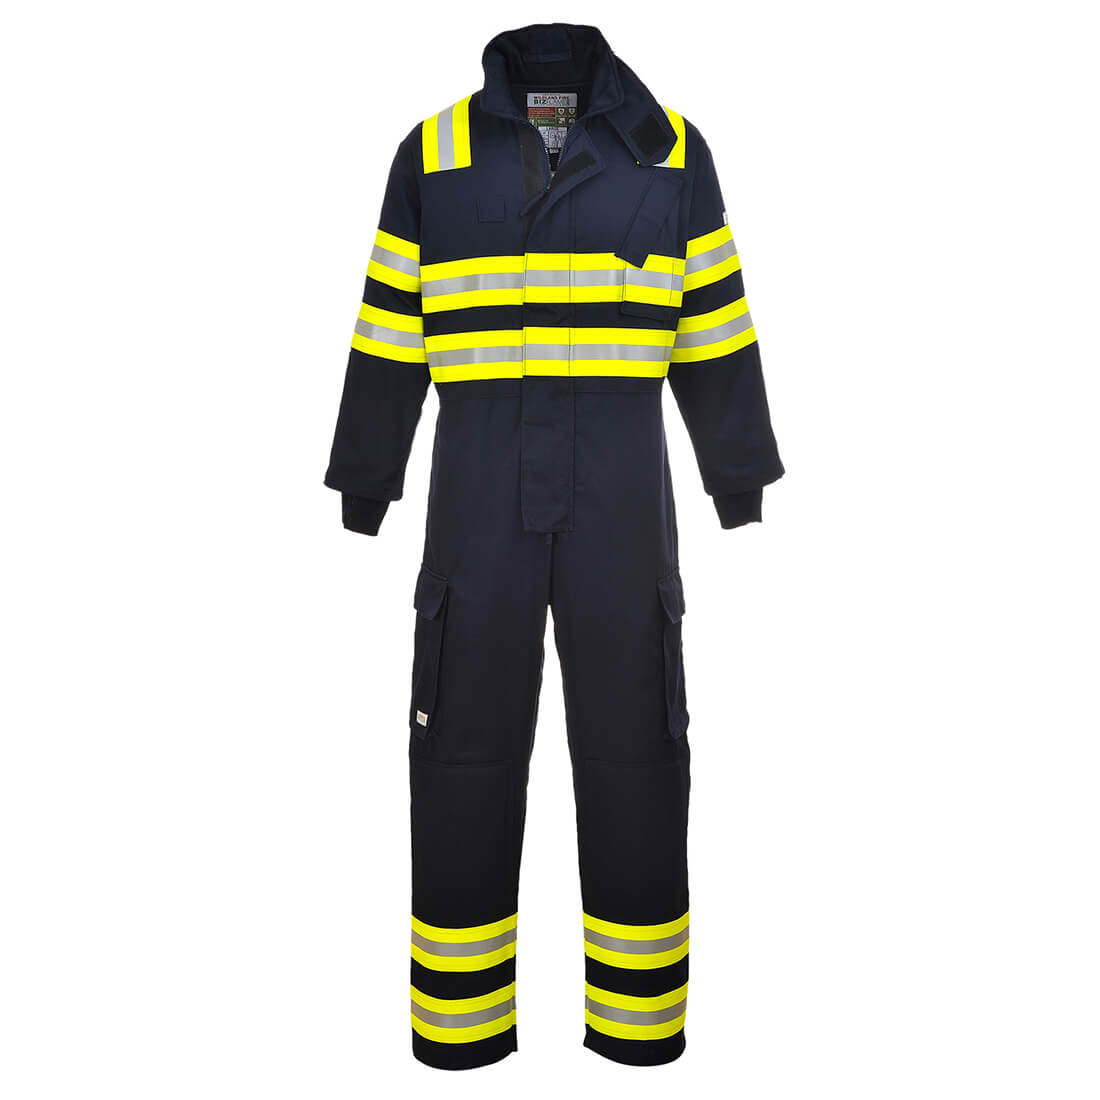 BizFlame Wildland Fire Coverall Navy 2XL